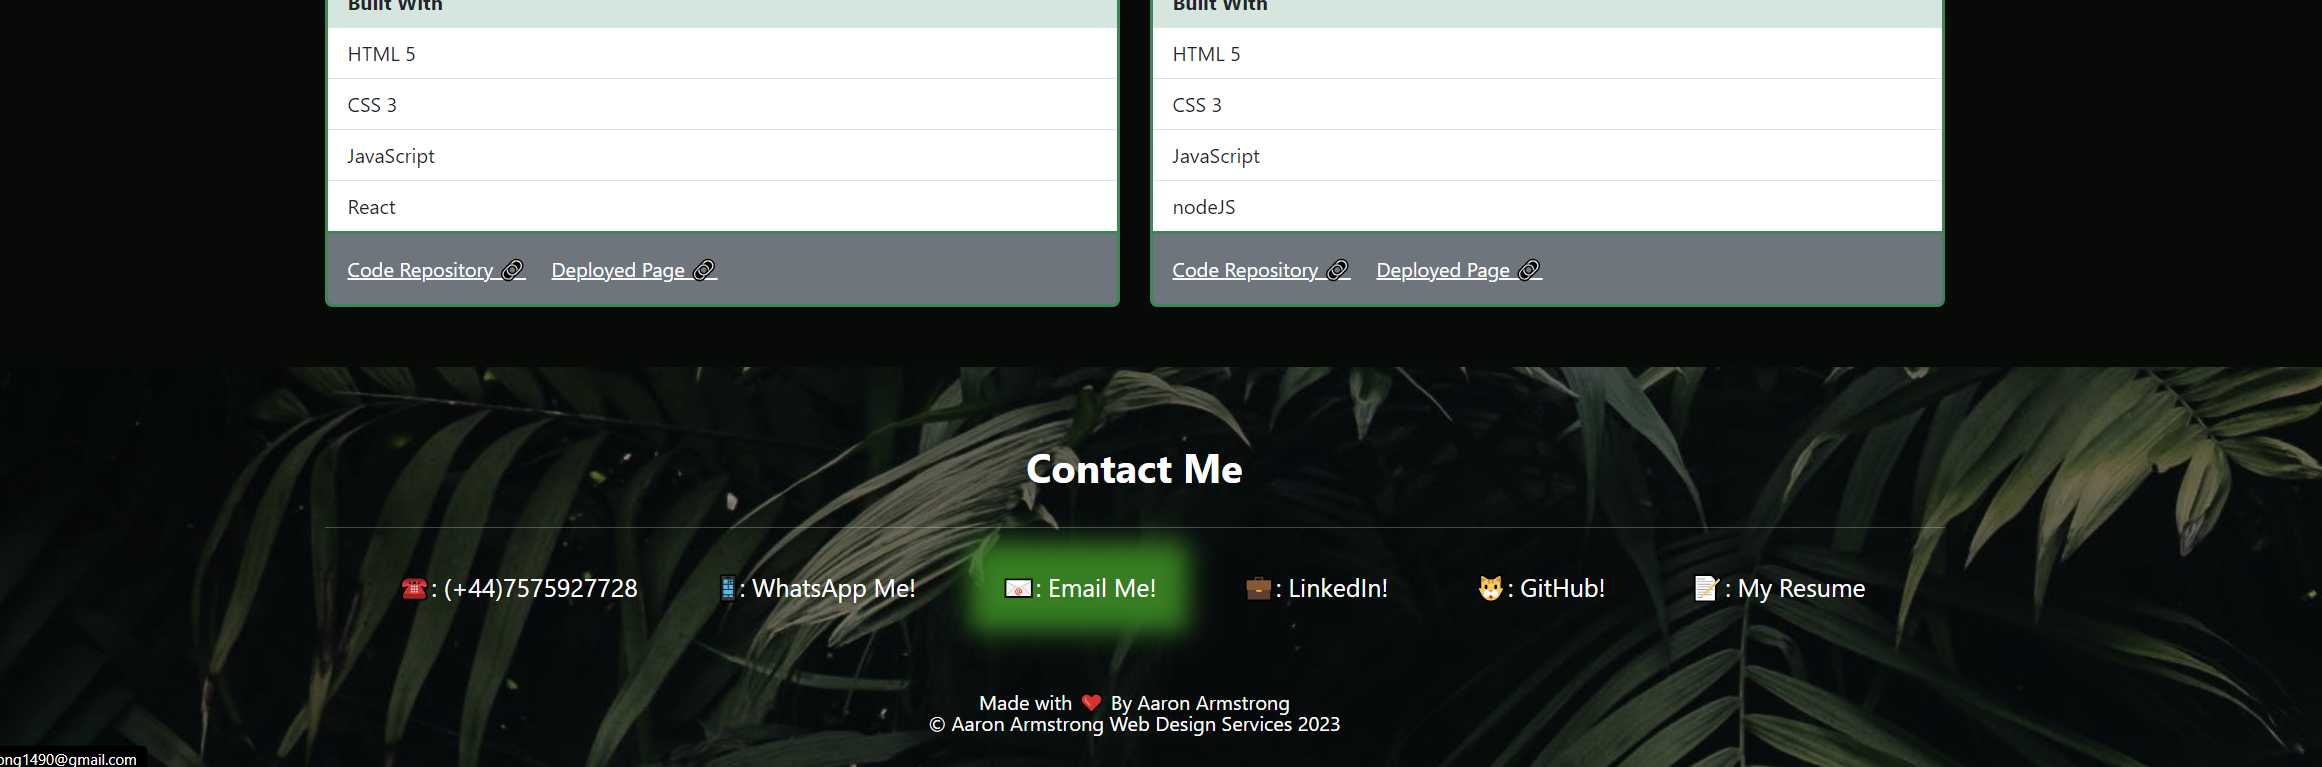 Demo of box shadow and hover effect in contact me section